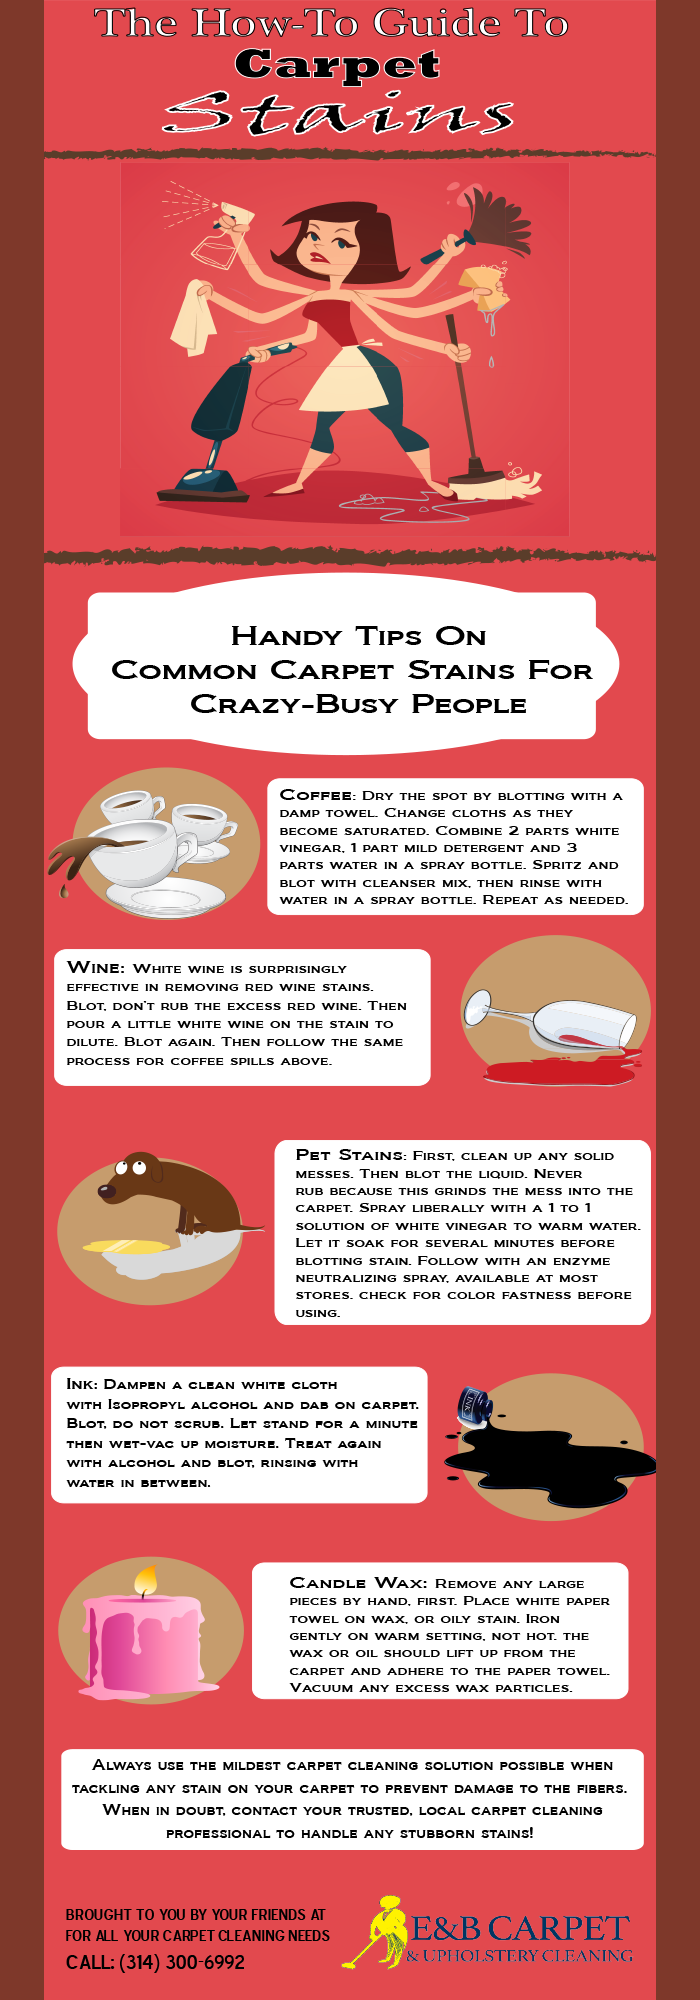 An infographic that tackles common carpet stains.